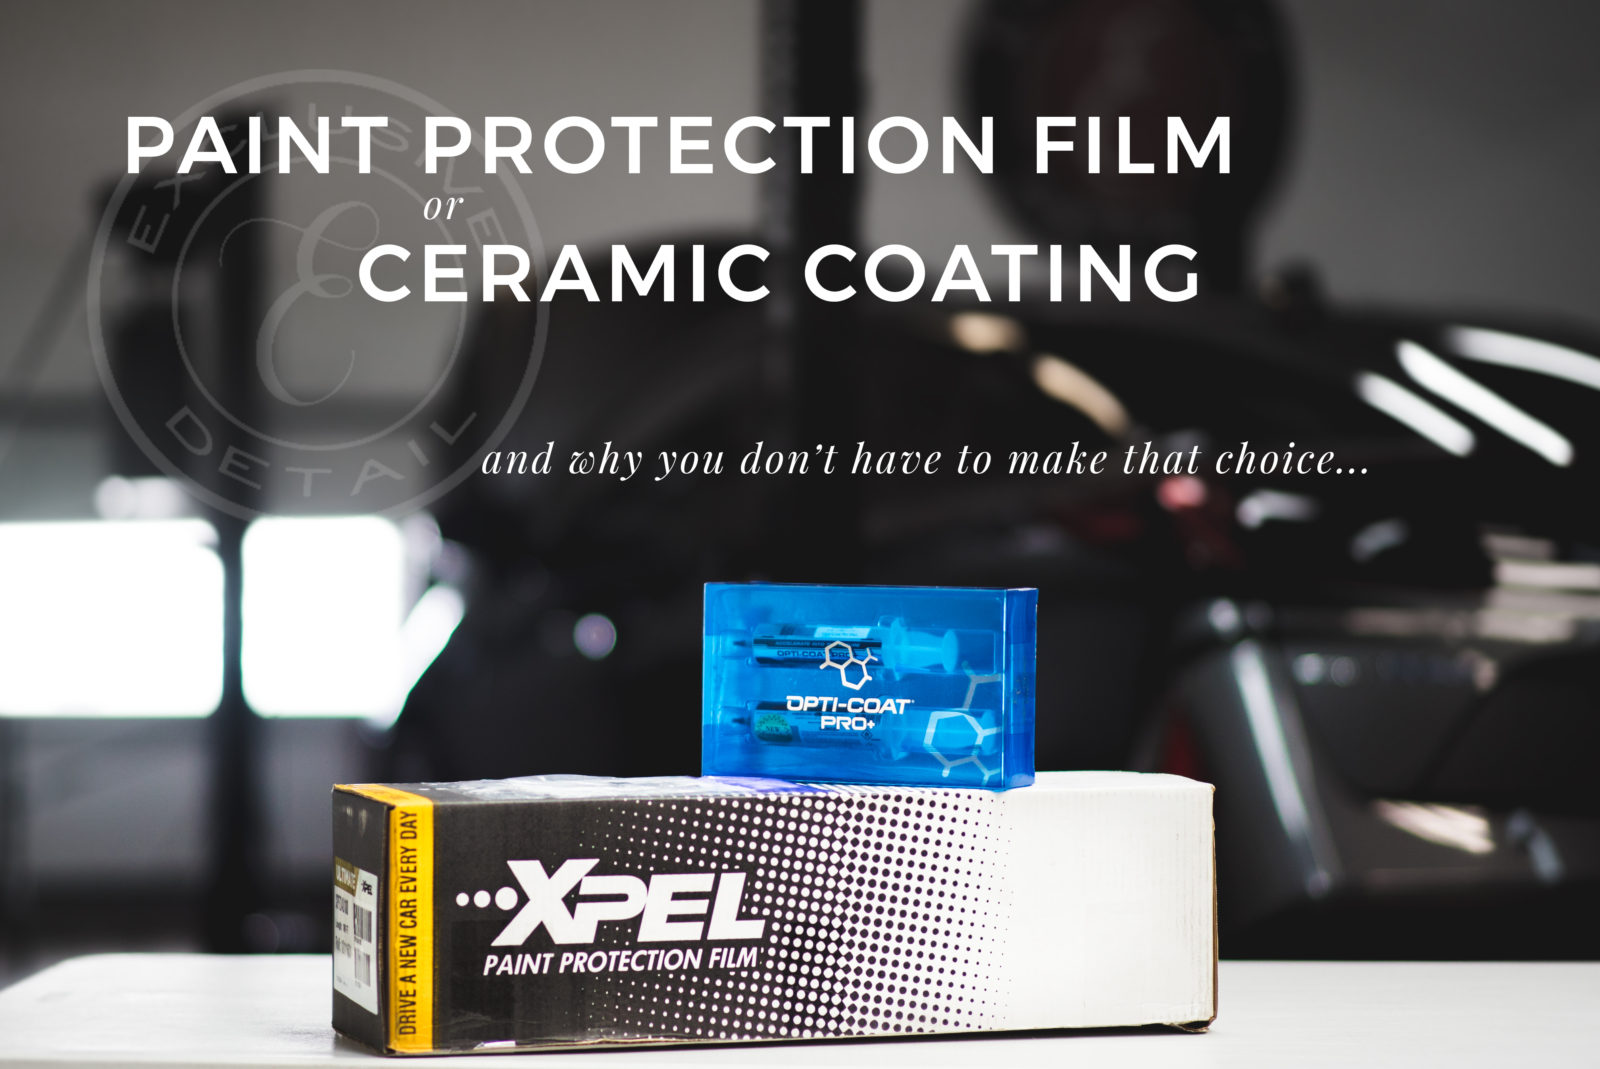 How to: Evaluate the Quality & Service of a Ceramic Coating